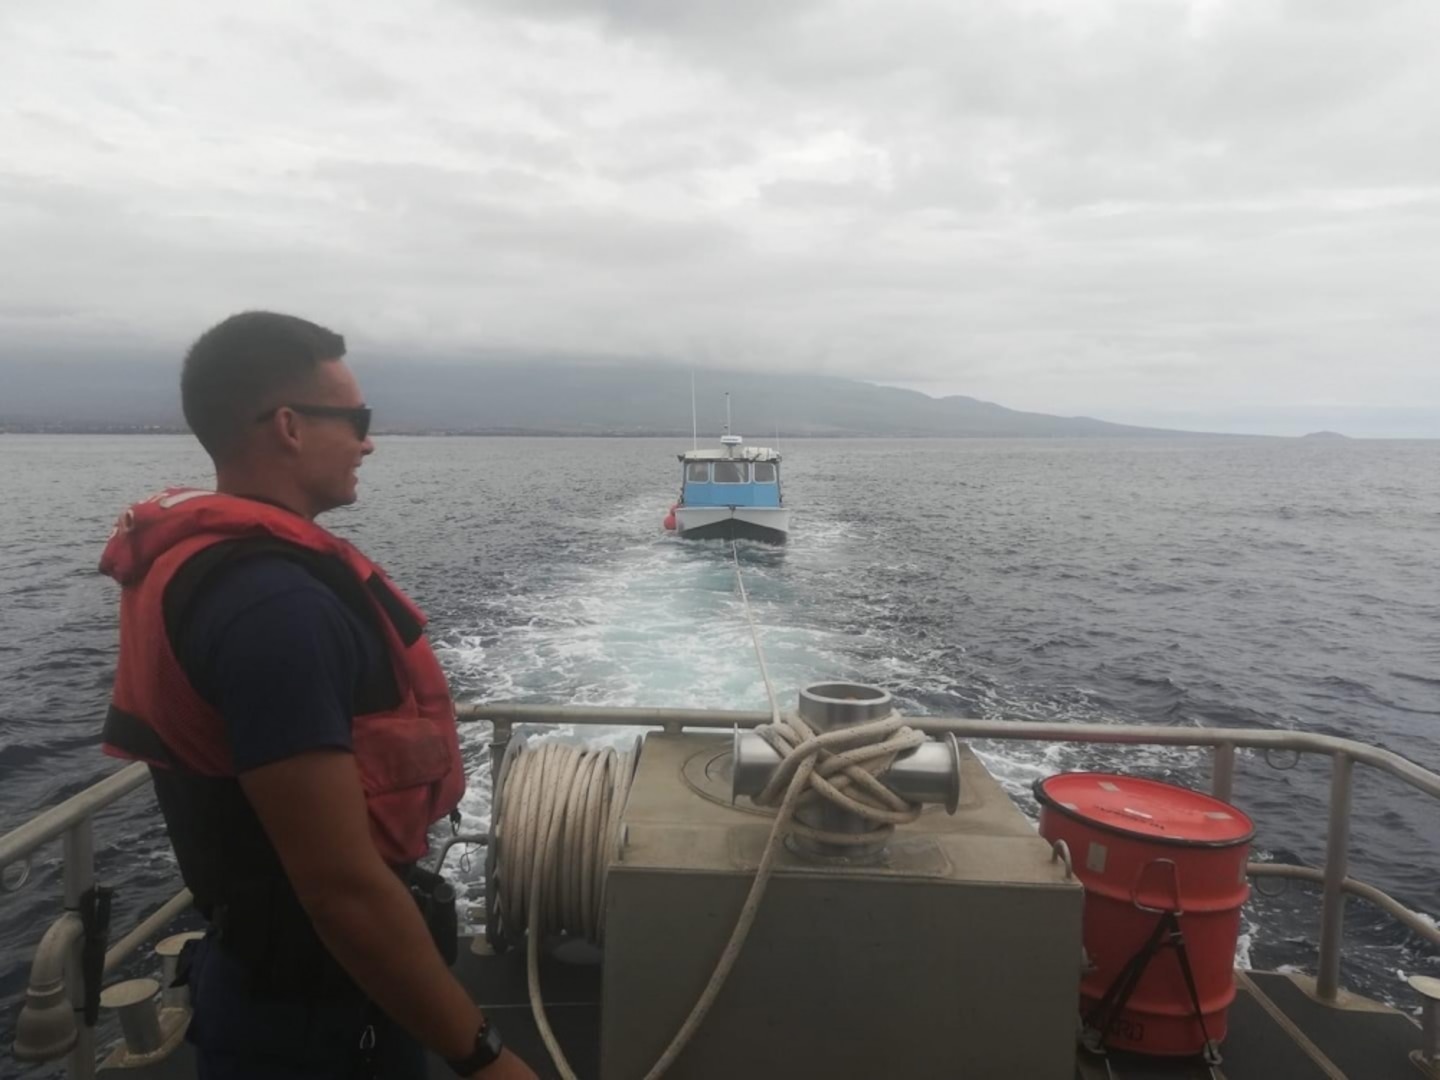 Coast Guard Enlisted Person of the Year, Seaman Theodore Kirkbride, aids in the towing of a vessel in Maui. Kirkbride has assisted in over 15 search and rescue cases, saving over 22 lives. (U.S. Coast Guard courtesy asset)